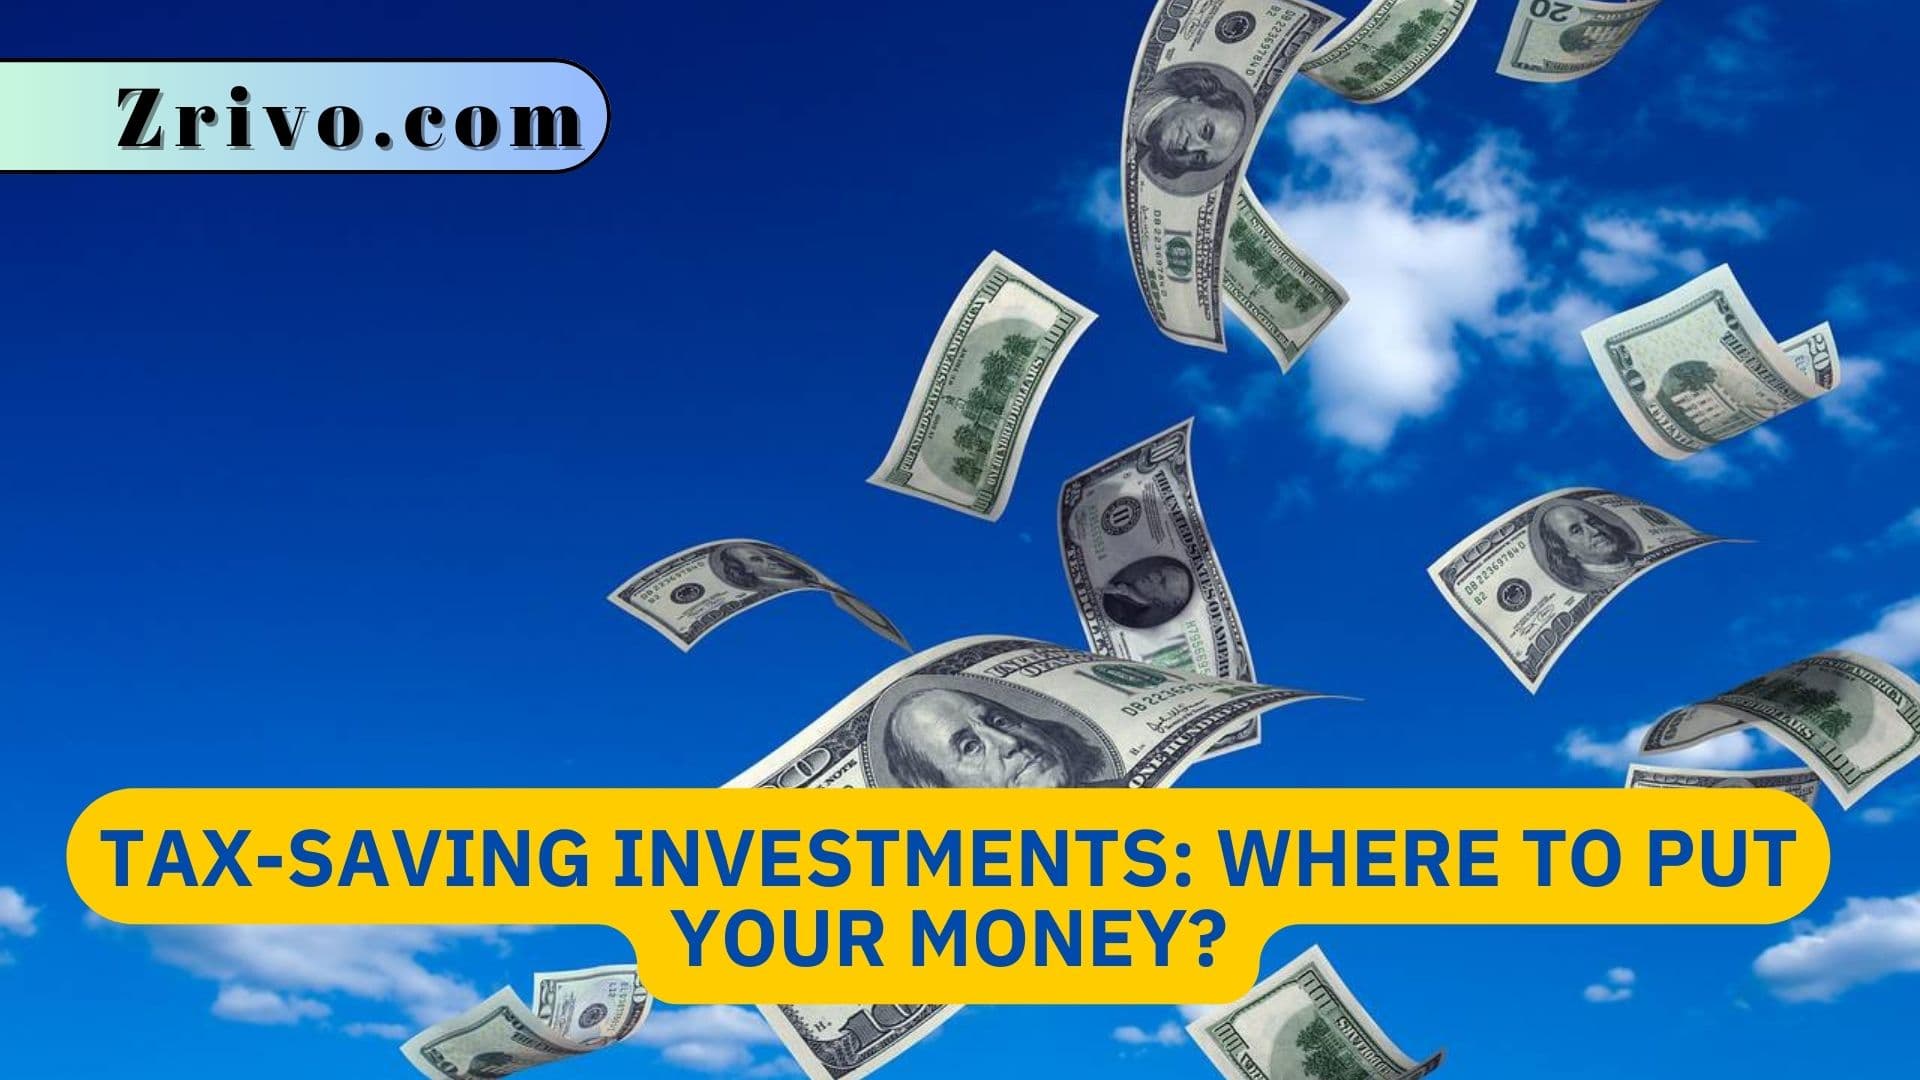 Tax-Saving Investments Where to Put Your Money